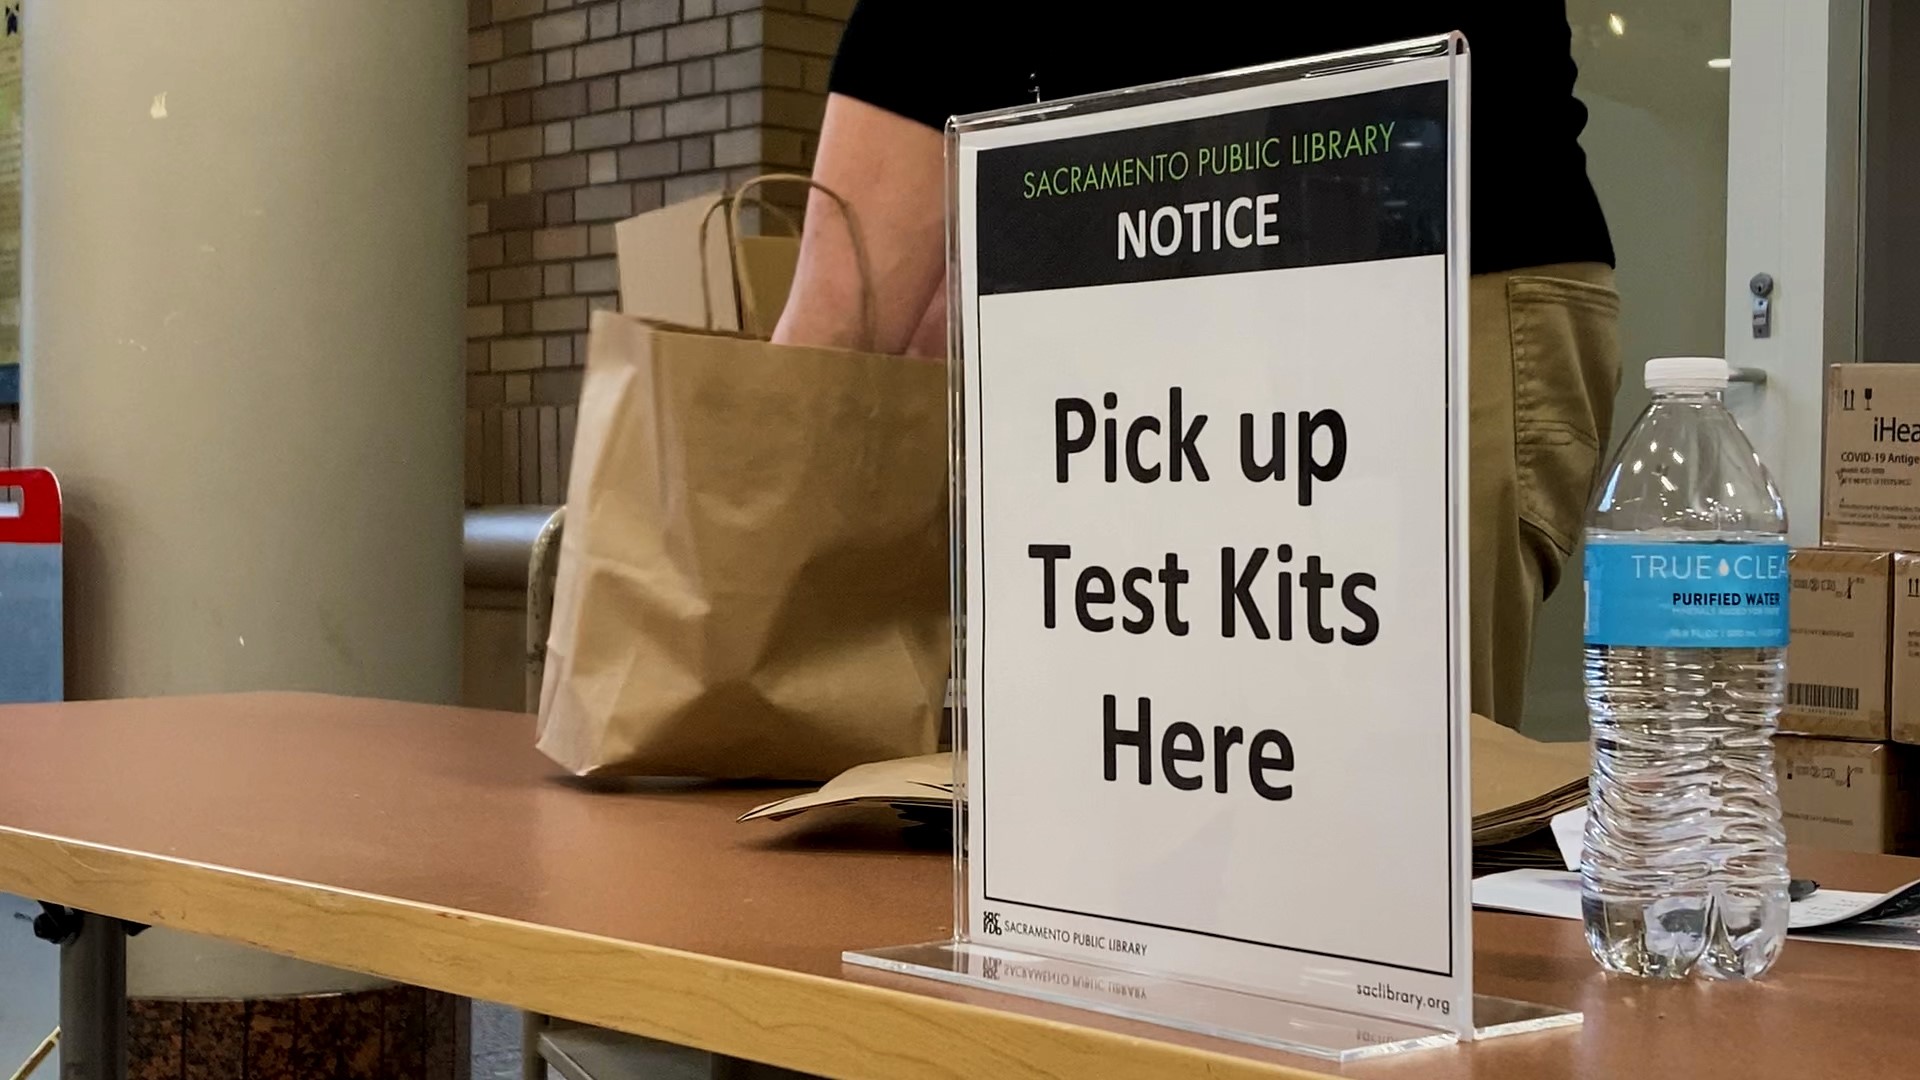 Those seeking rapid COVID-19 tests may get one from either the Sacramento County Library System or the Folsom Public Library while supplies last.